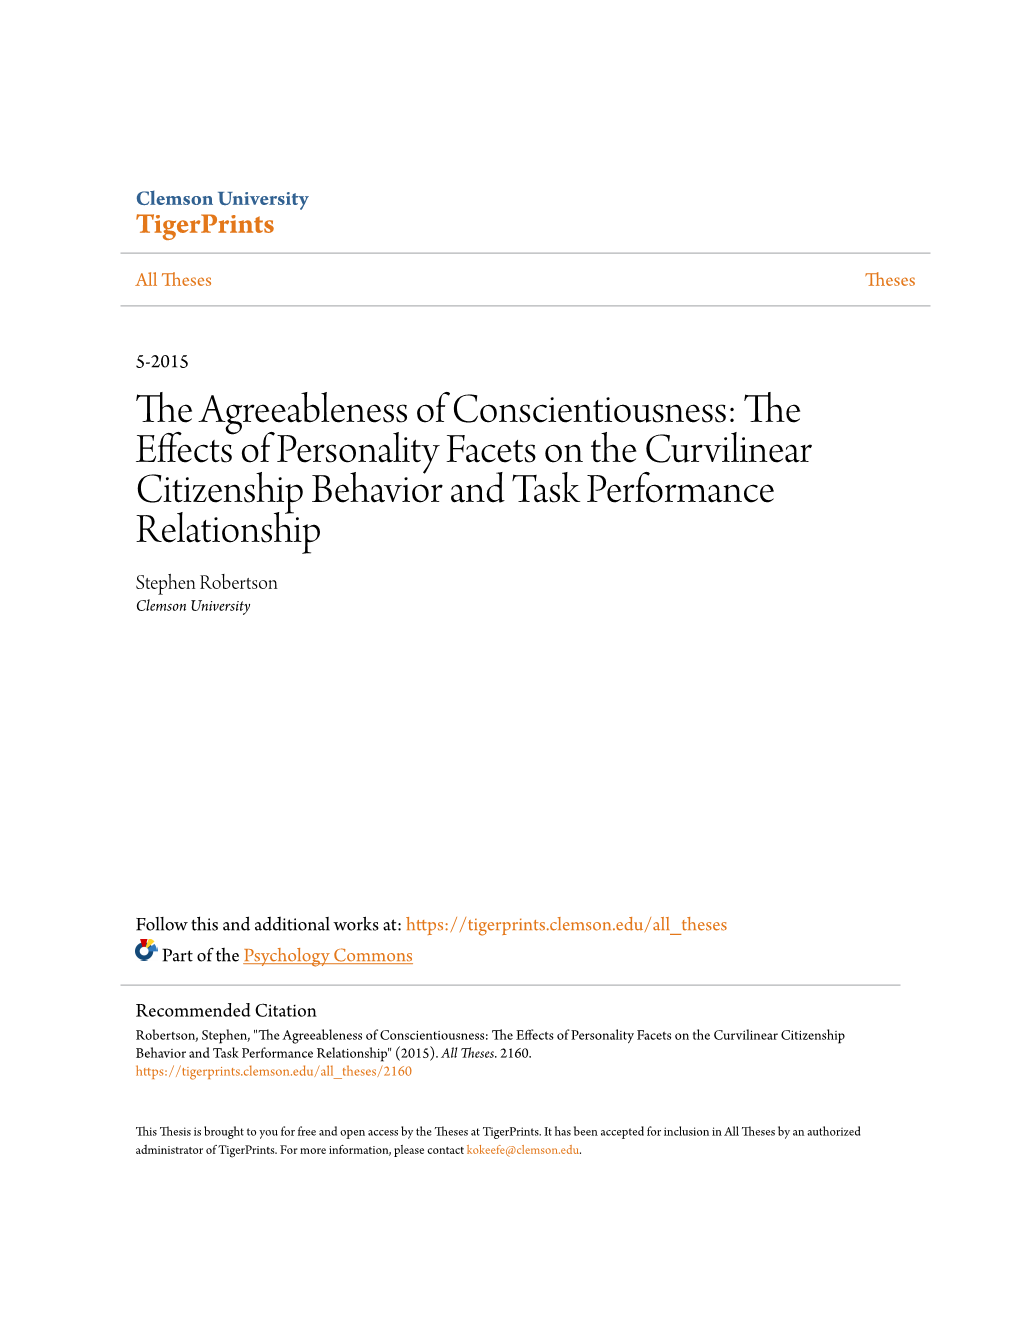 The Agreeableness of Conscientiousness